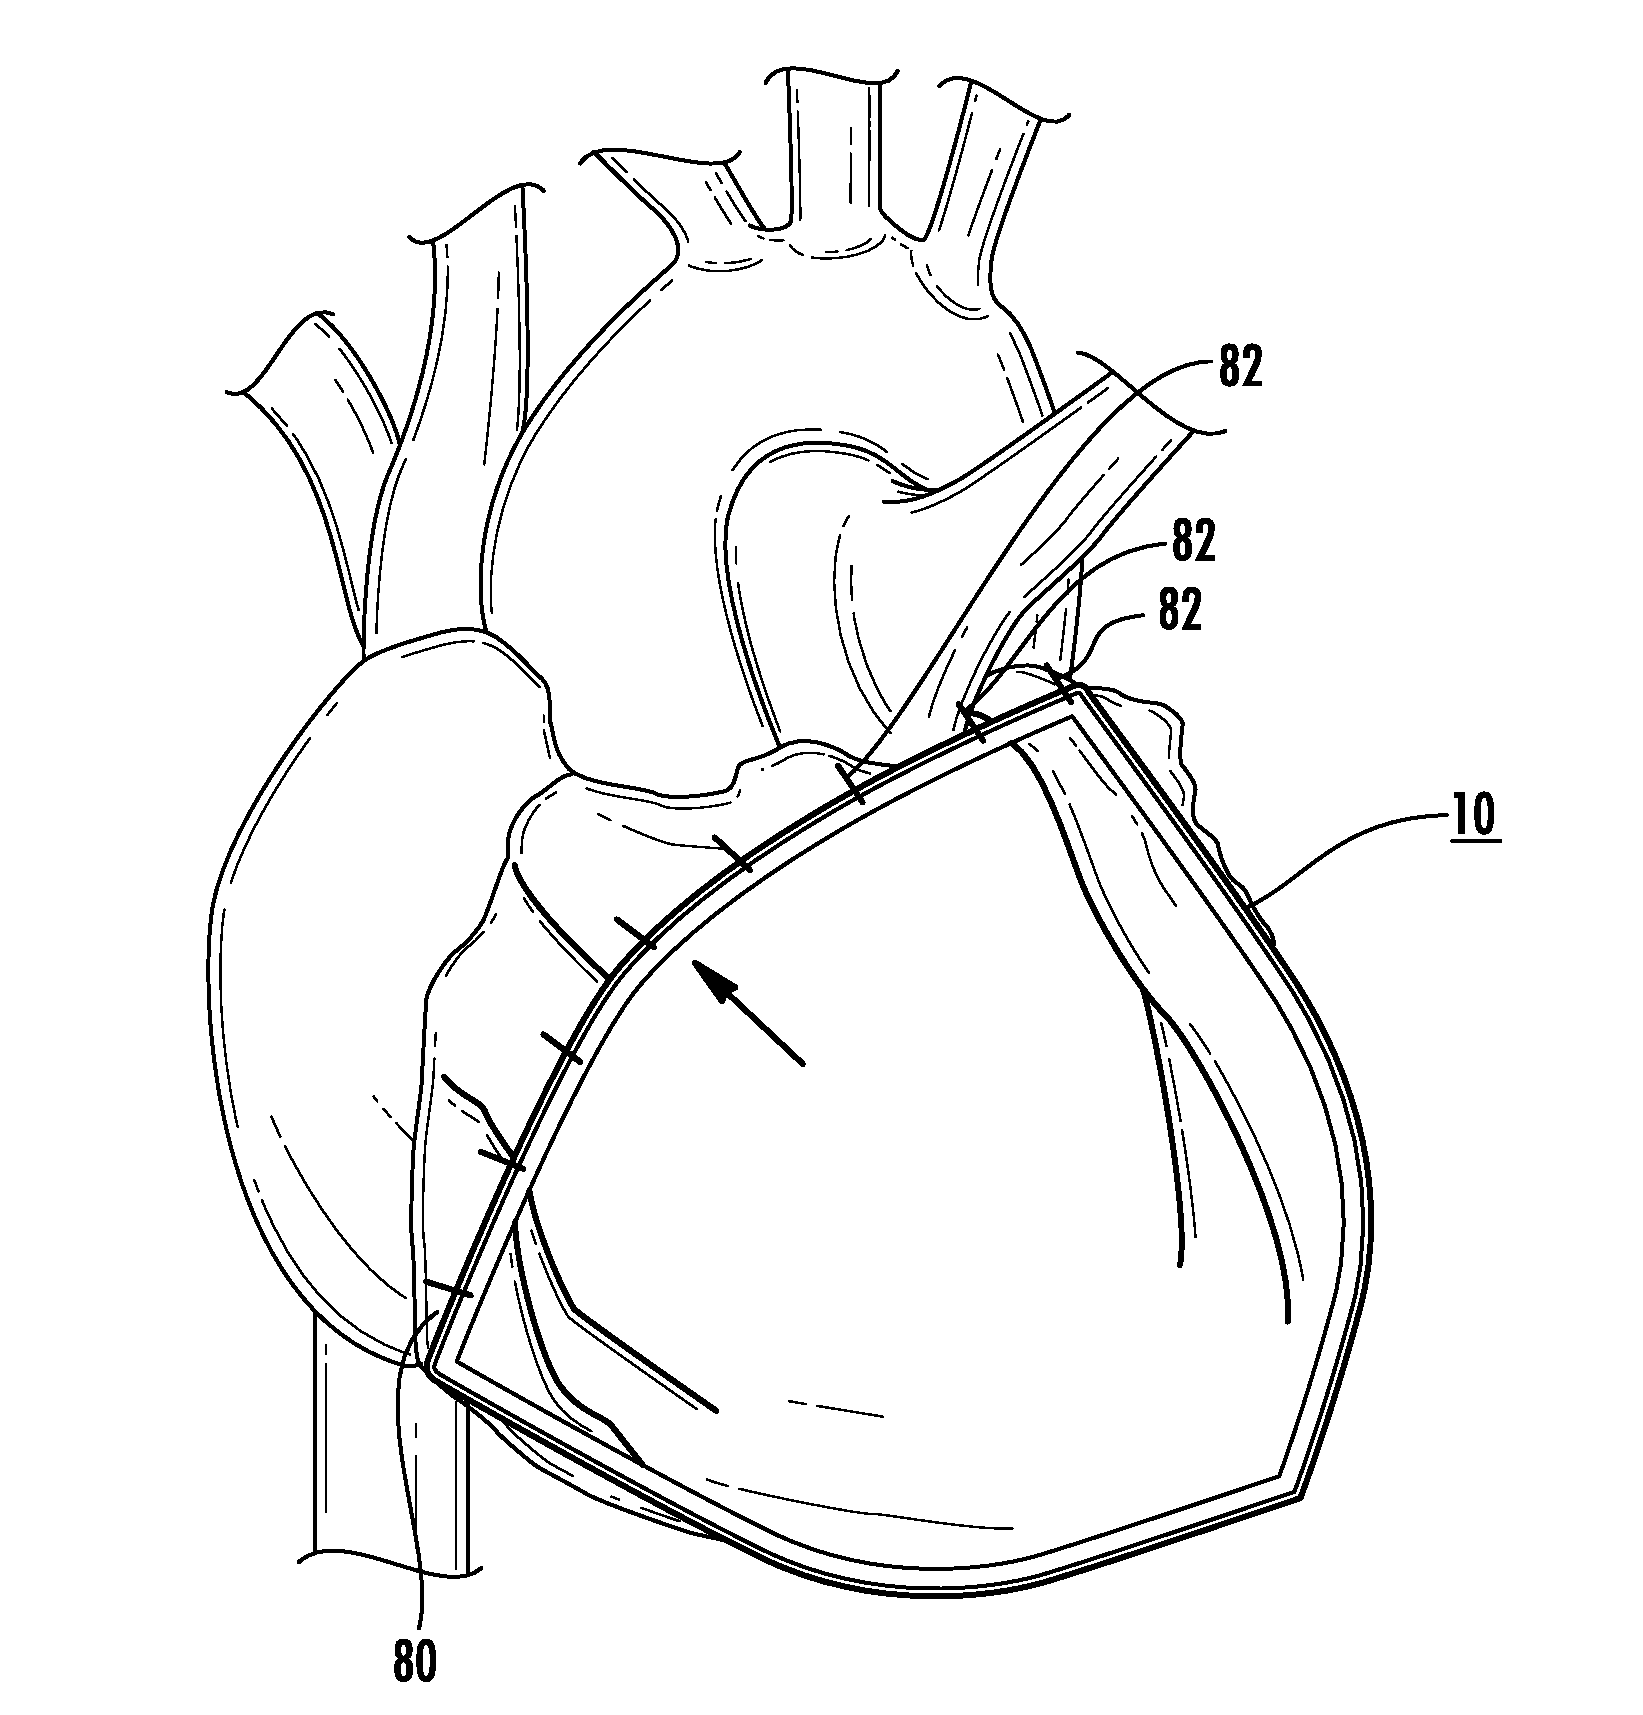 Bioactive implant for myocardial regeneration and ventricular chamber restoration